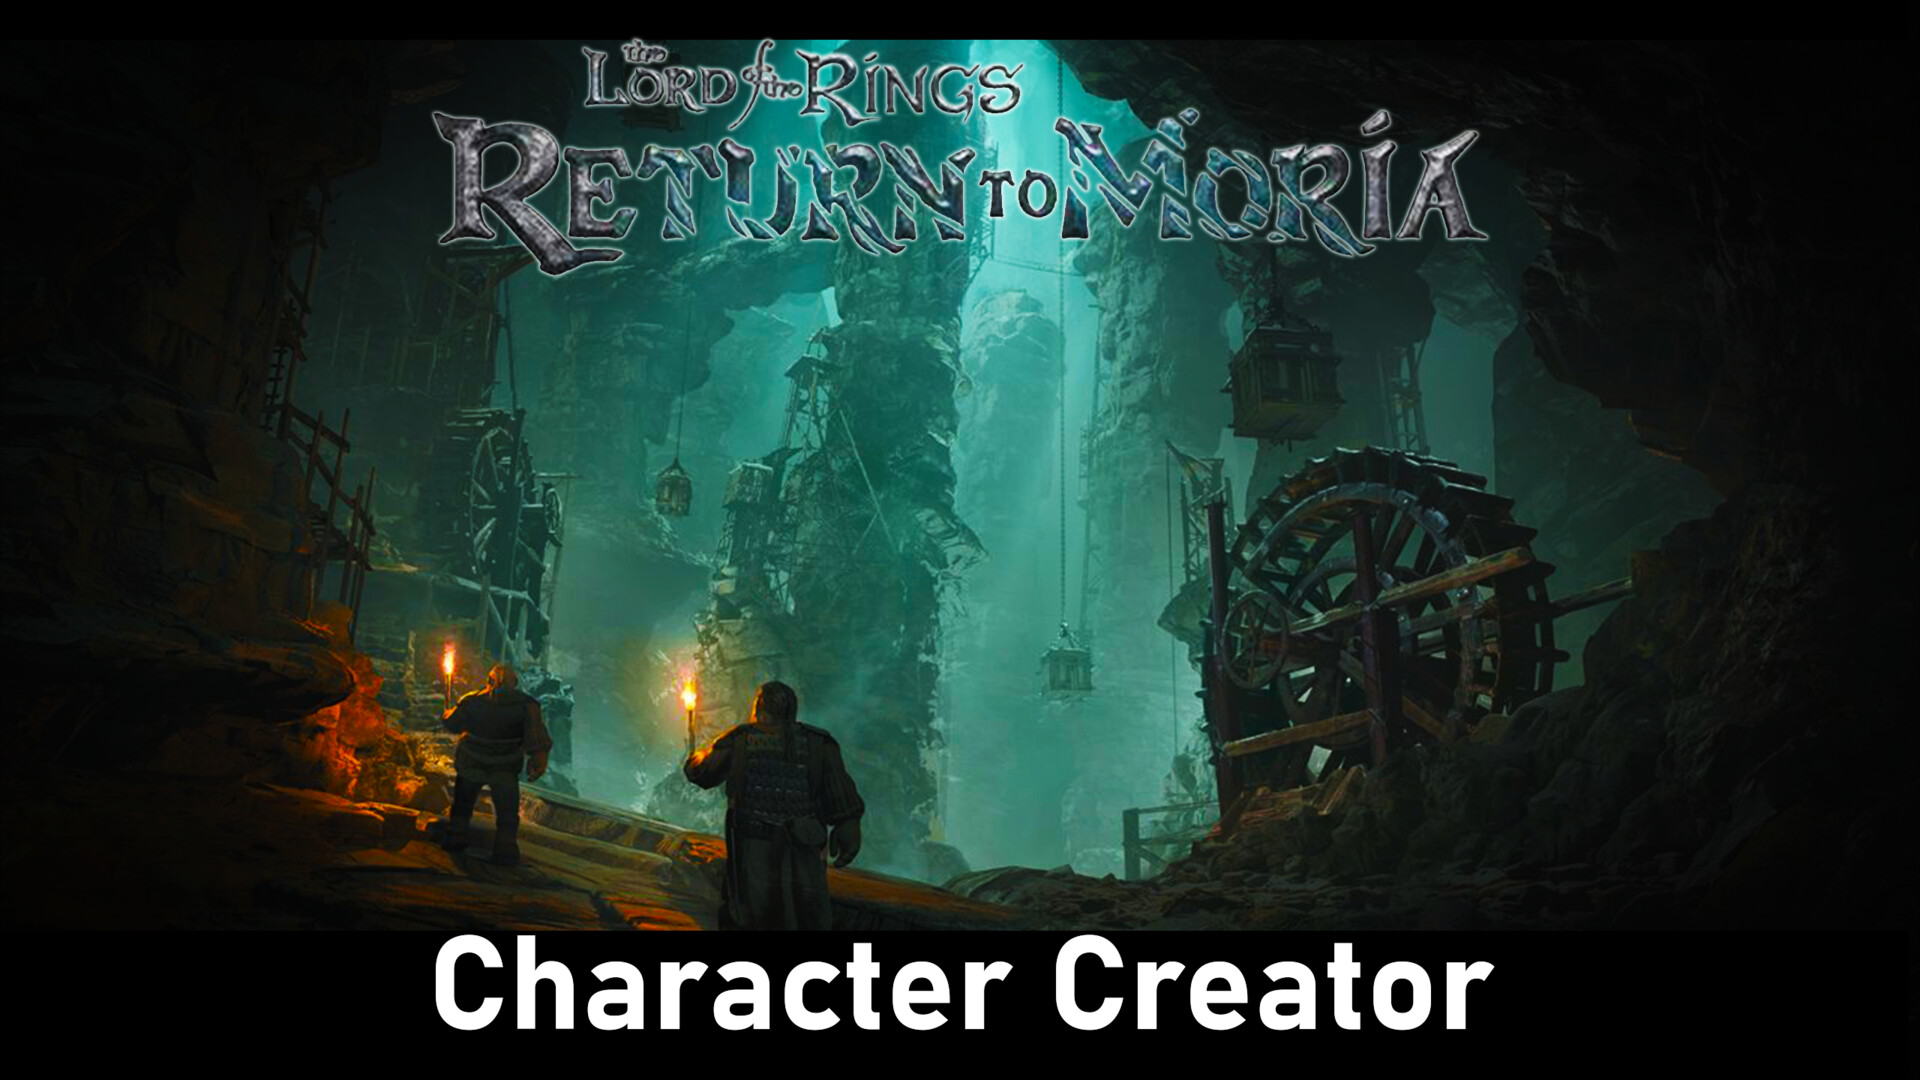 The Lord of the Rings: Return to Moria - Announcement Trailer